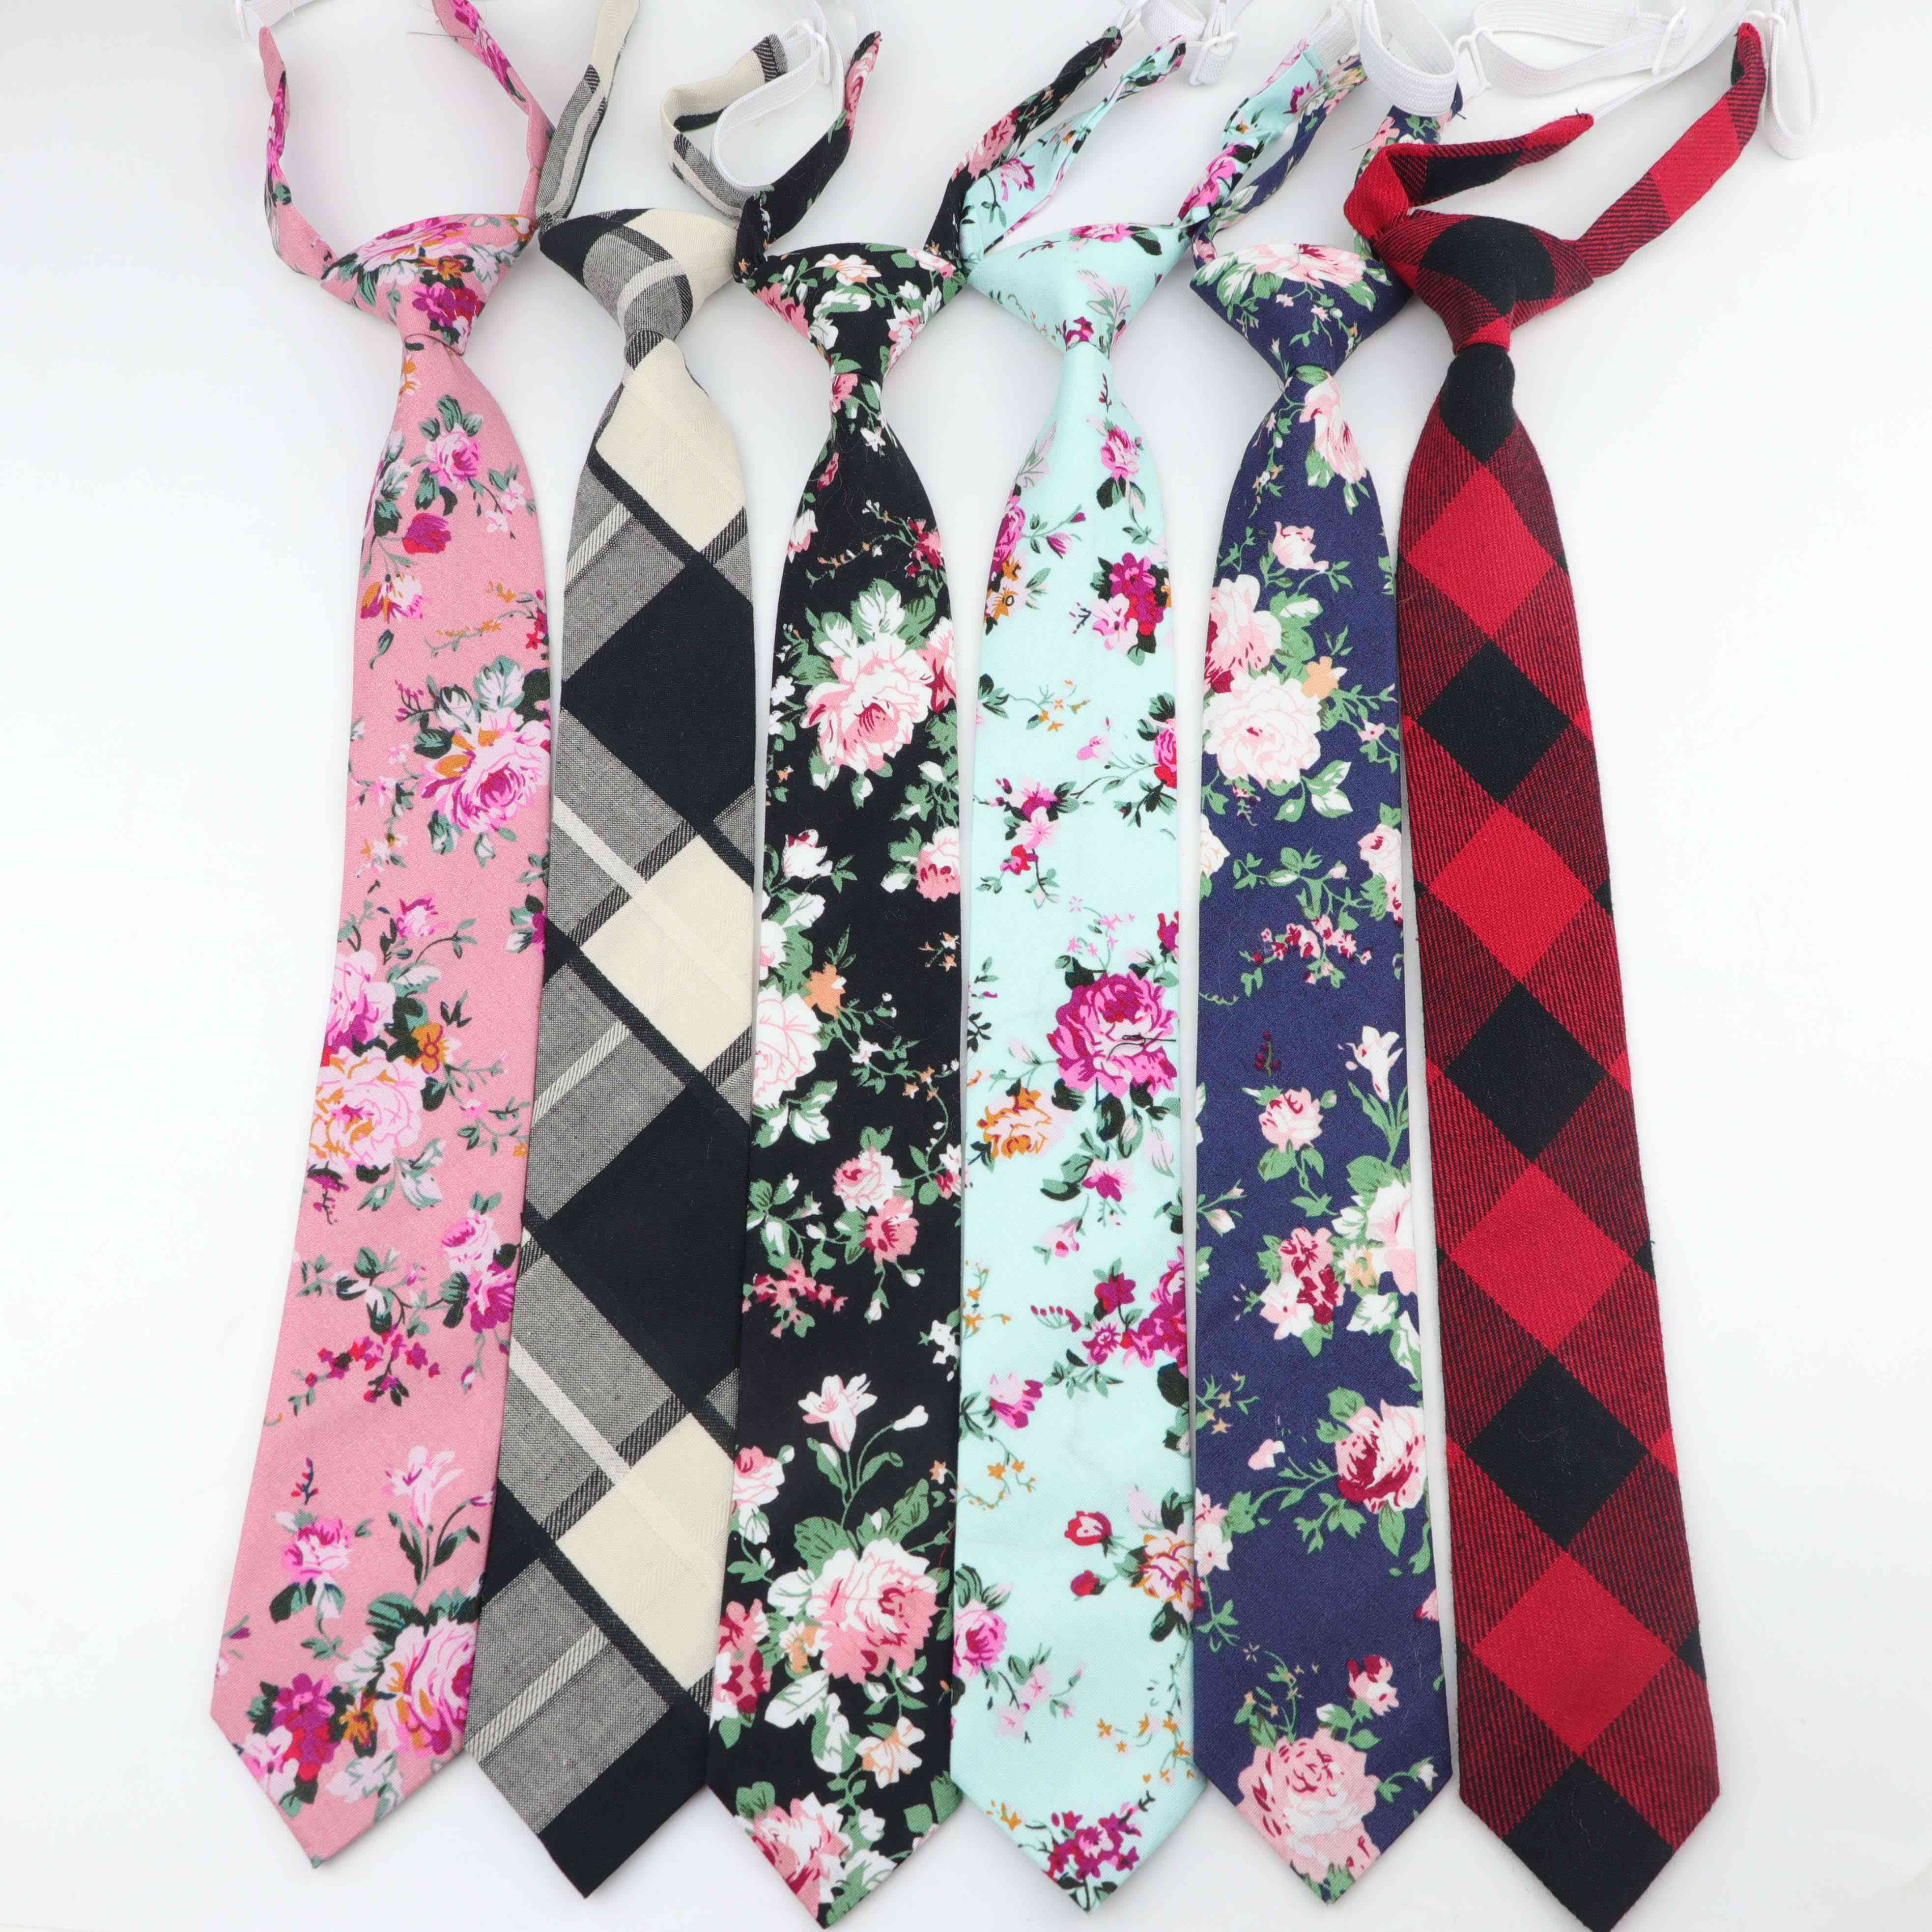 Cotton Kids Colorful Tie Width Striped Fruit Floral Ties